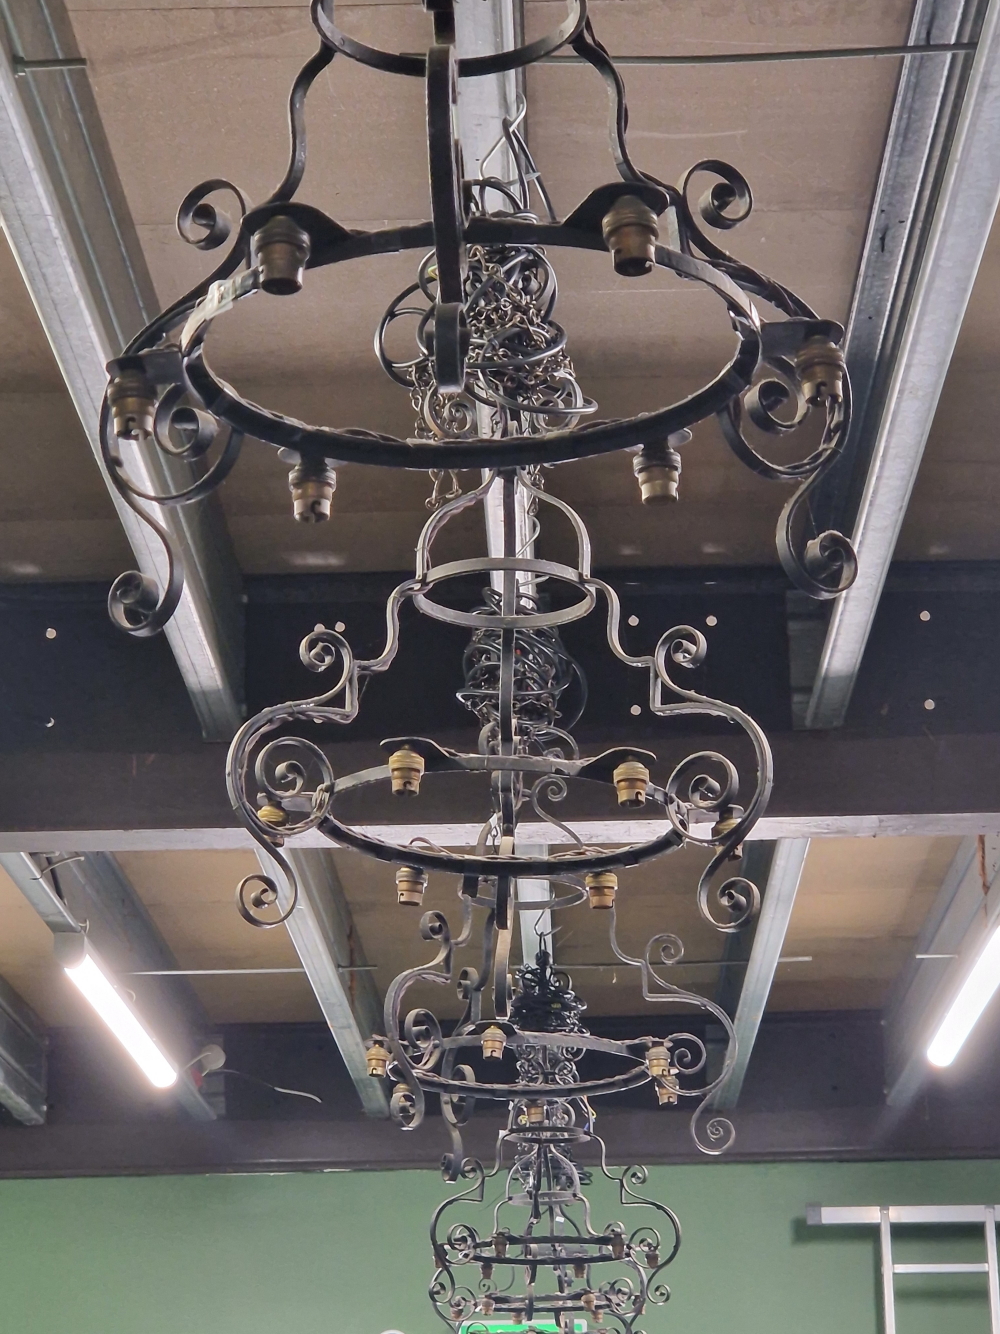 A SET OF SIX ECCLESIASTICAL WROUGHT IRON CHANDELIER LIGHT FITTINGS - Image 3 of 3